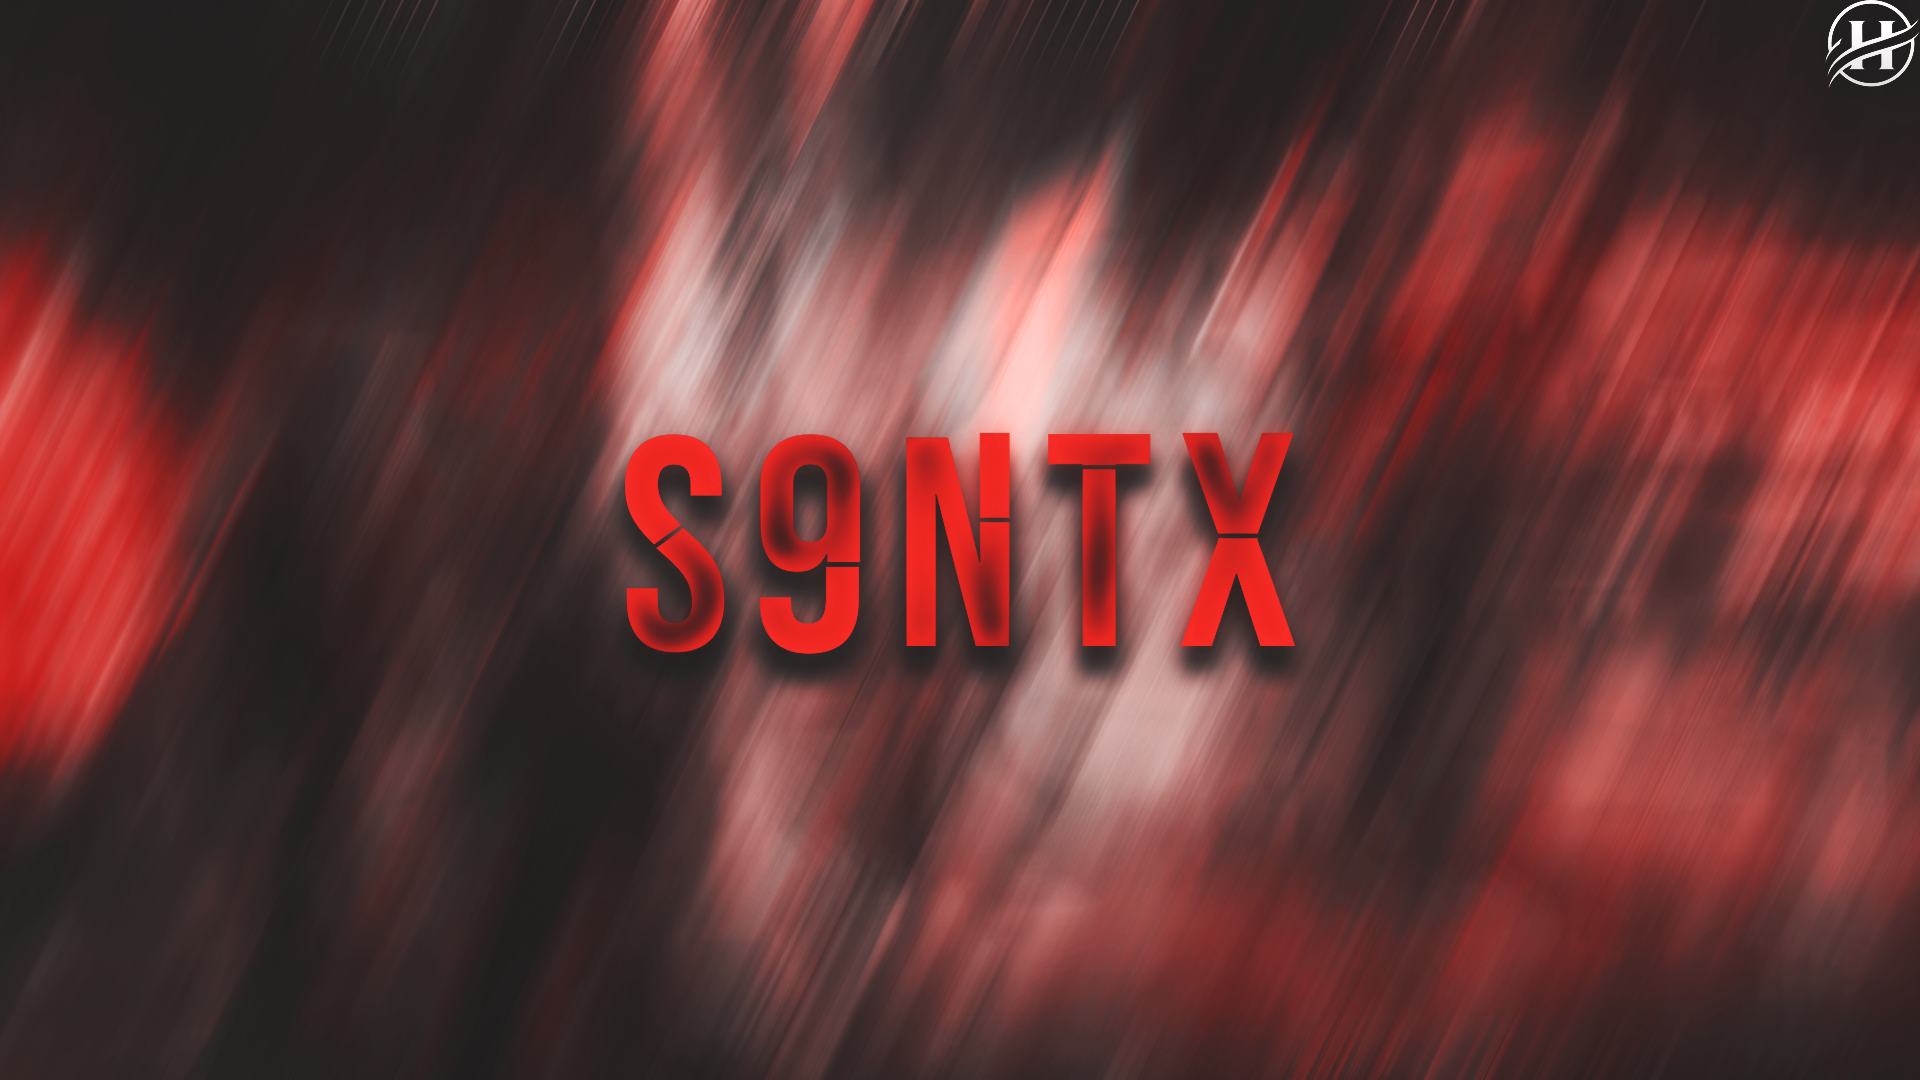 S9NTXx.png - 1.56 MB